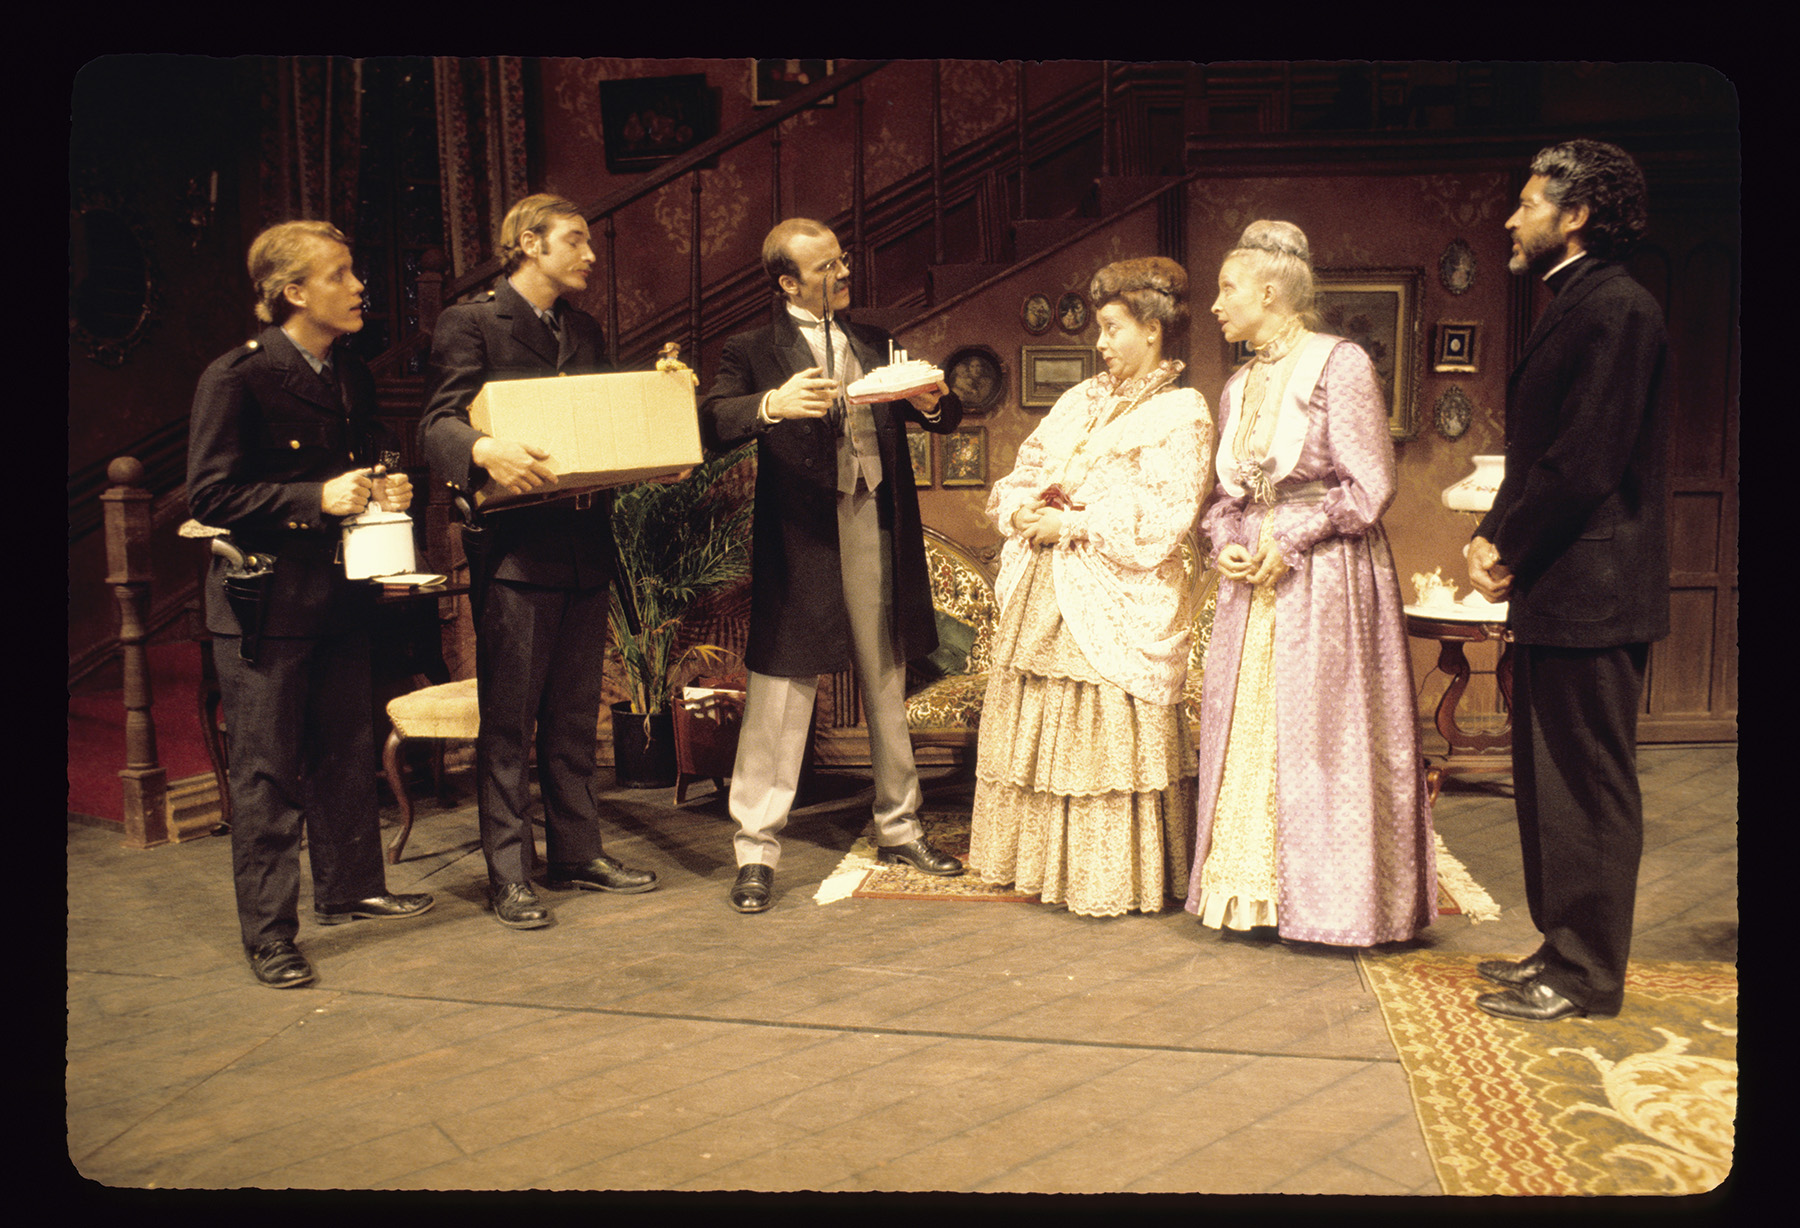 Arsenic and Old Lace, 1974-75 (image ua6_03_09_01_015, view in CORE Scholar)